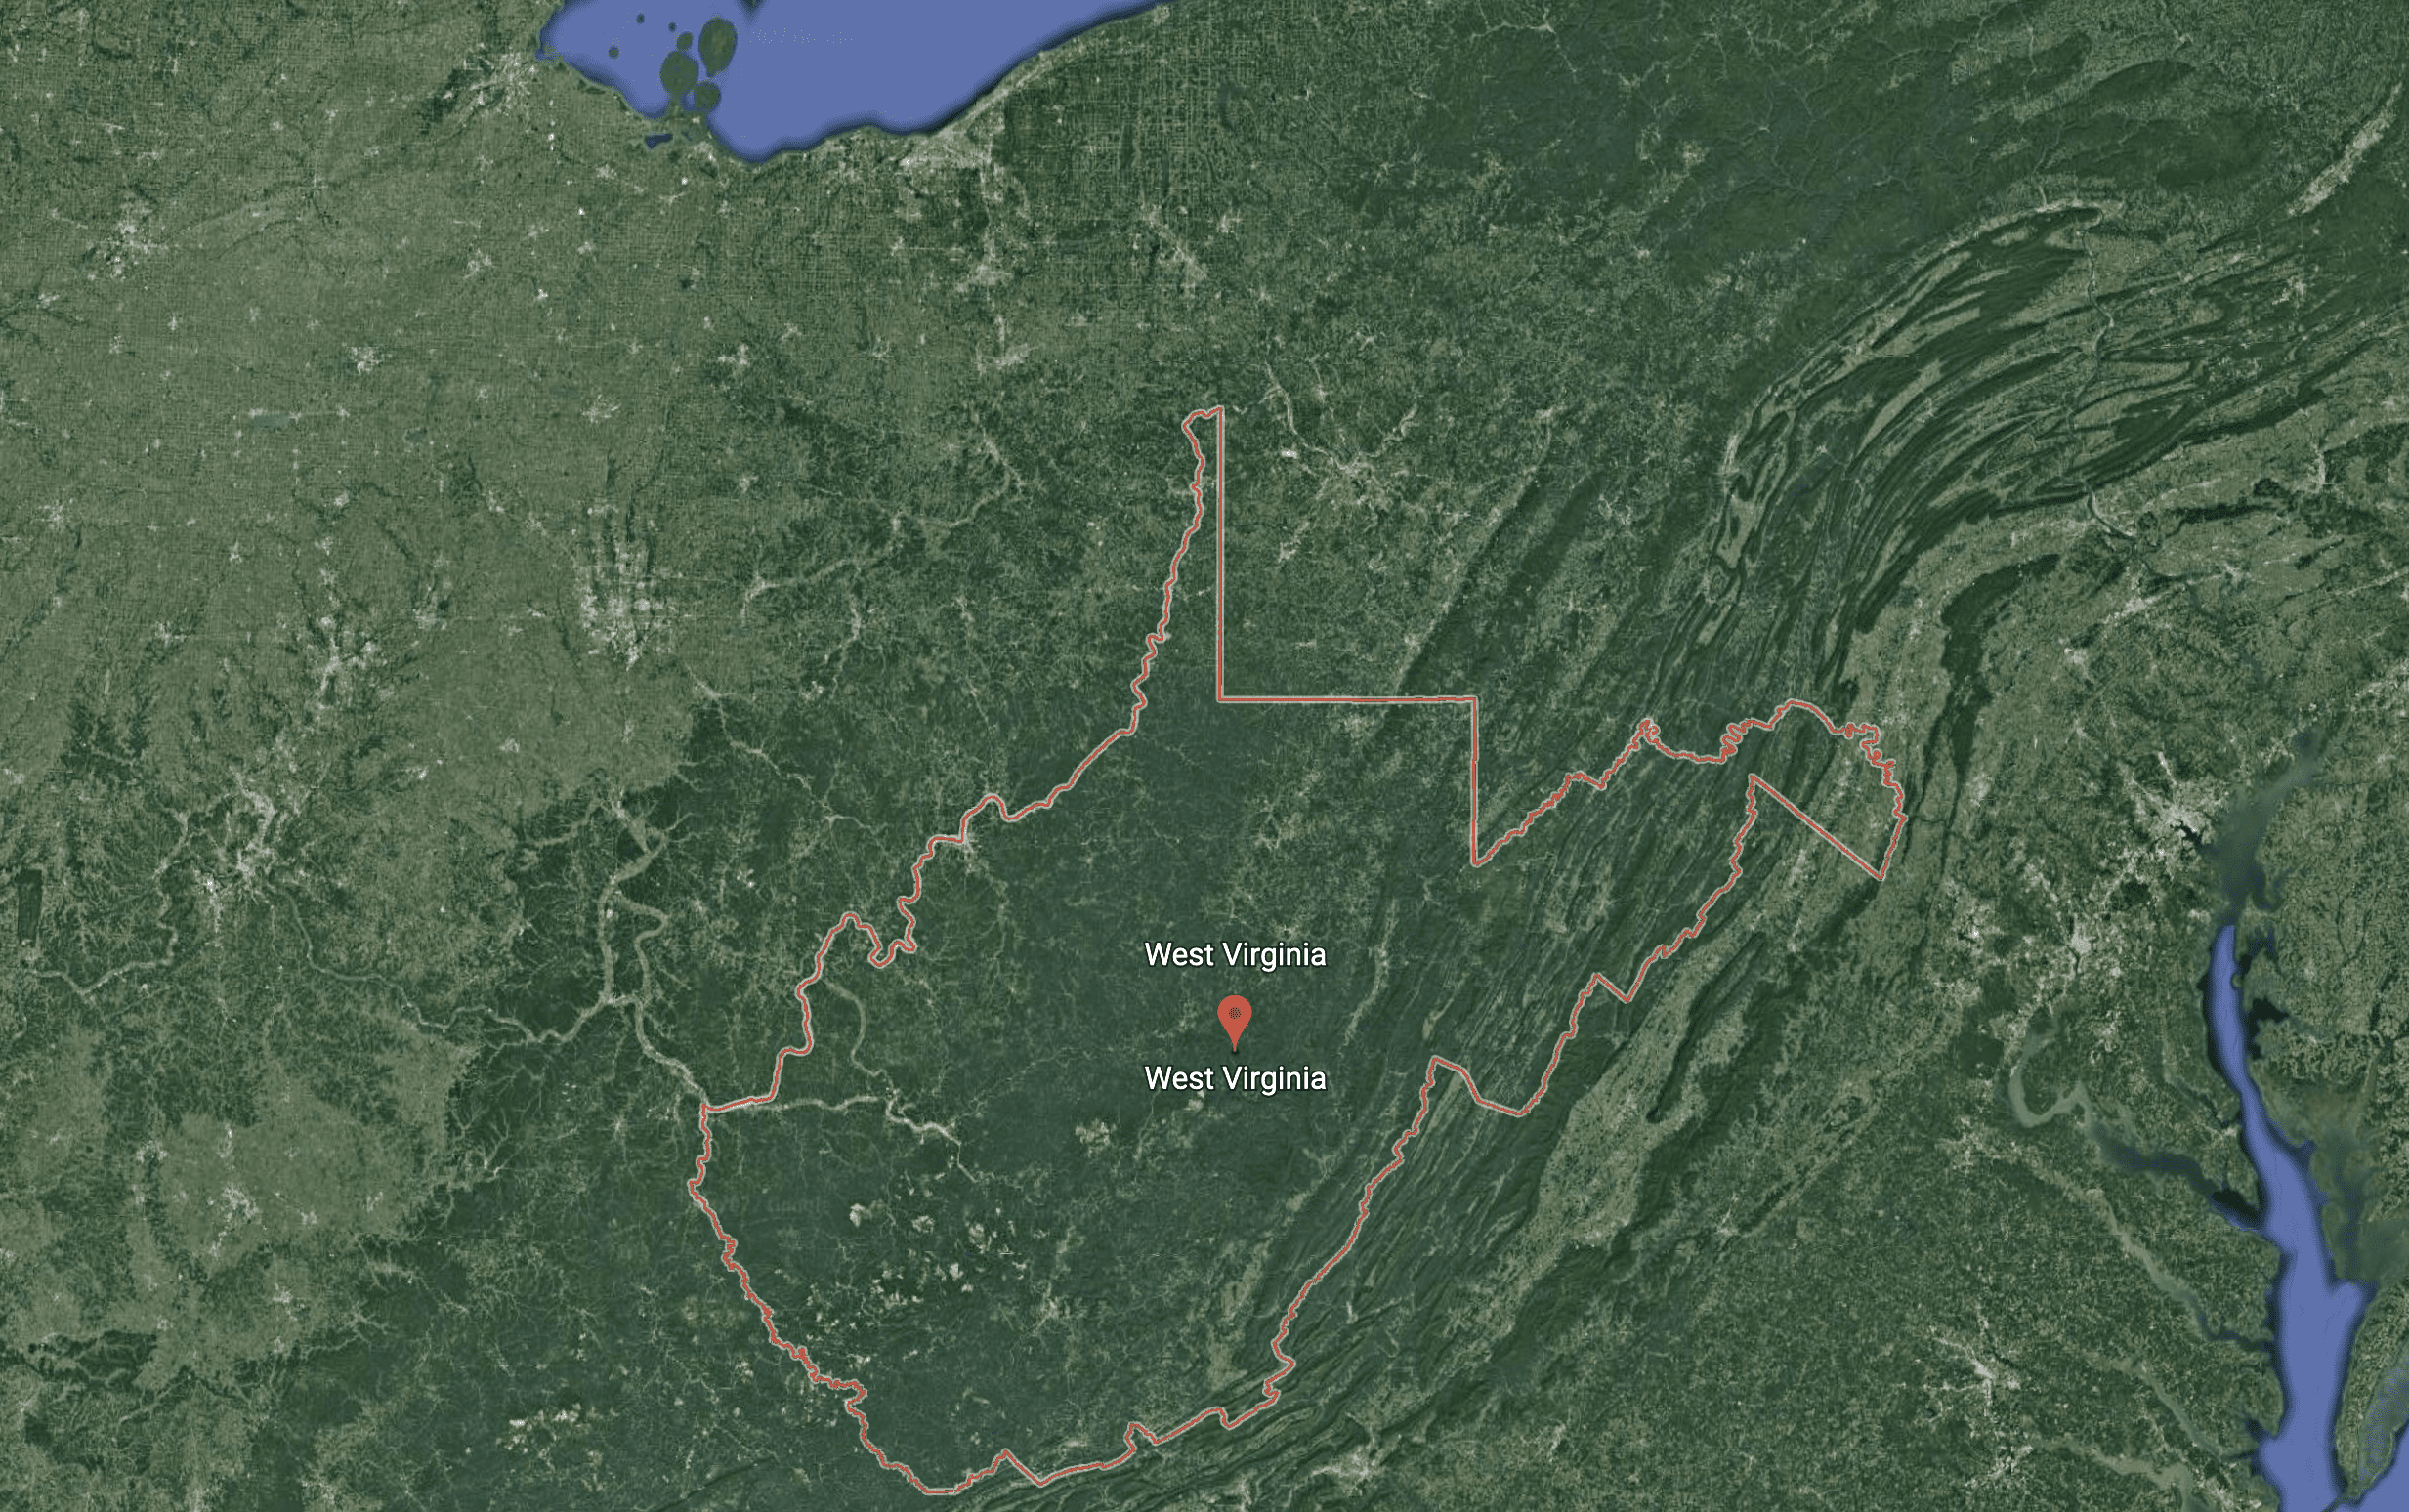 Satellite overhead image of West Virgina from Google Earth 2022